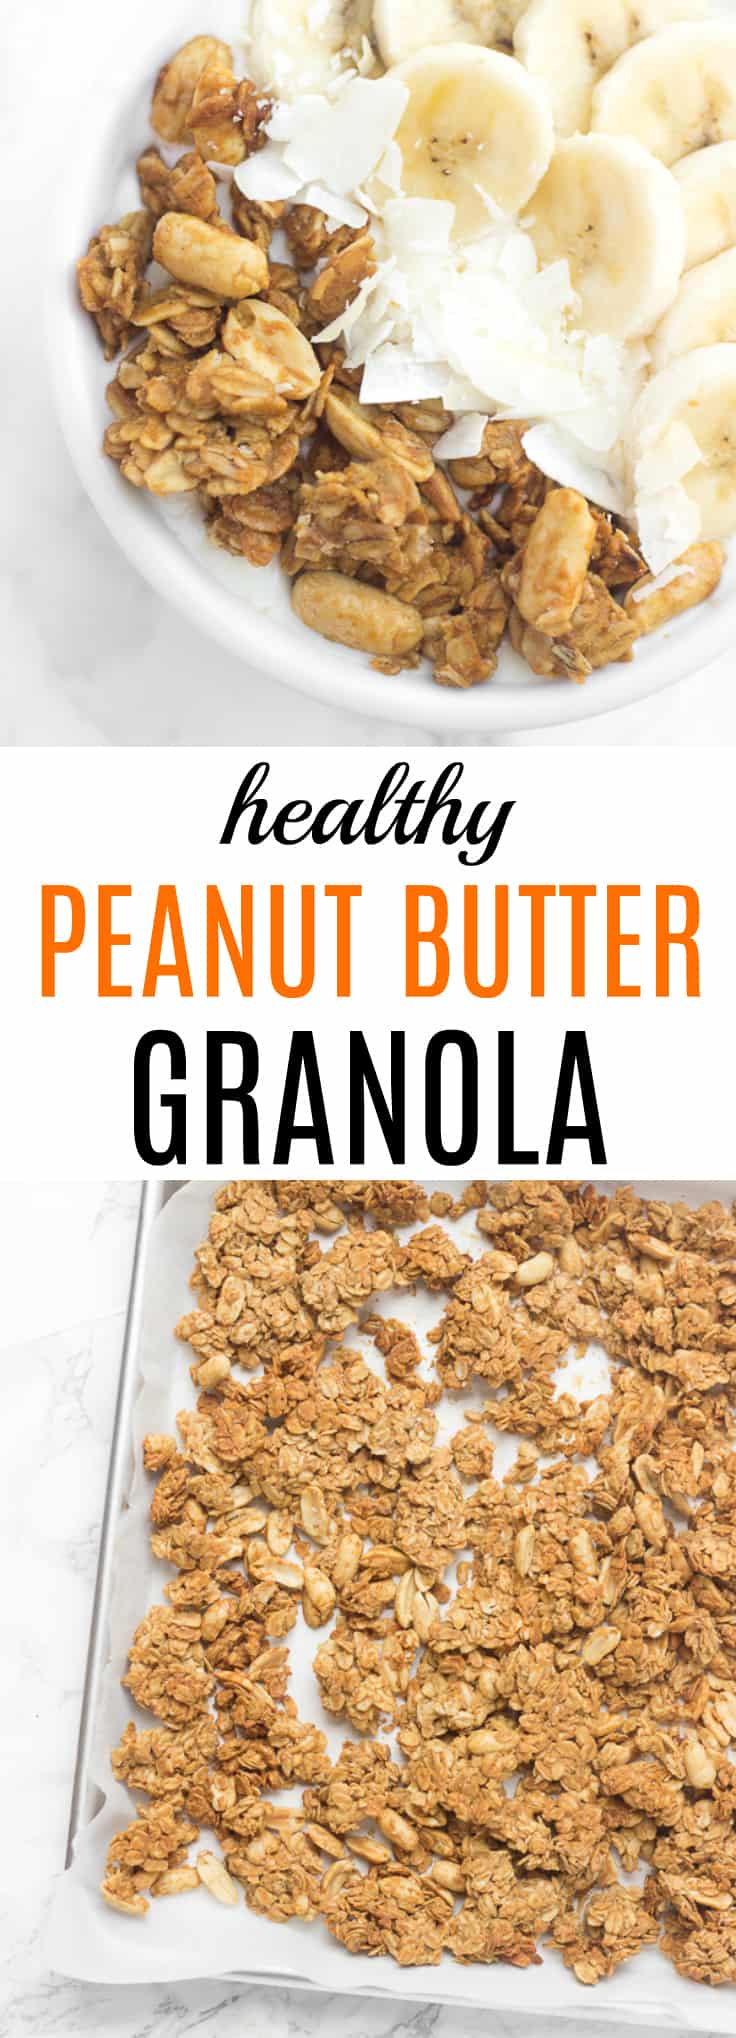 The BEST healthy peanut butter granola- my family LOVES this stuff!